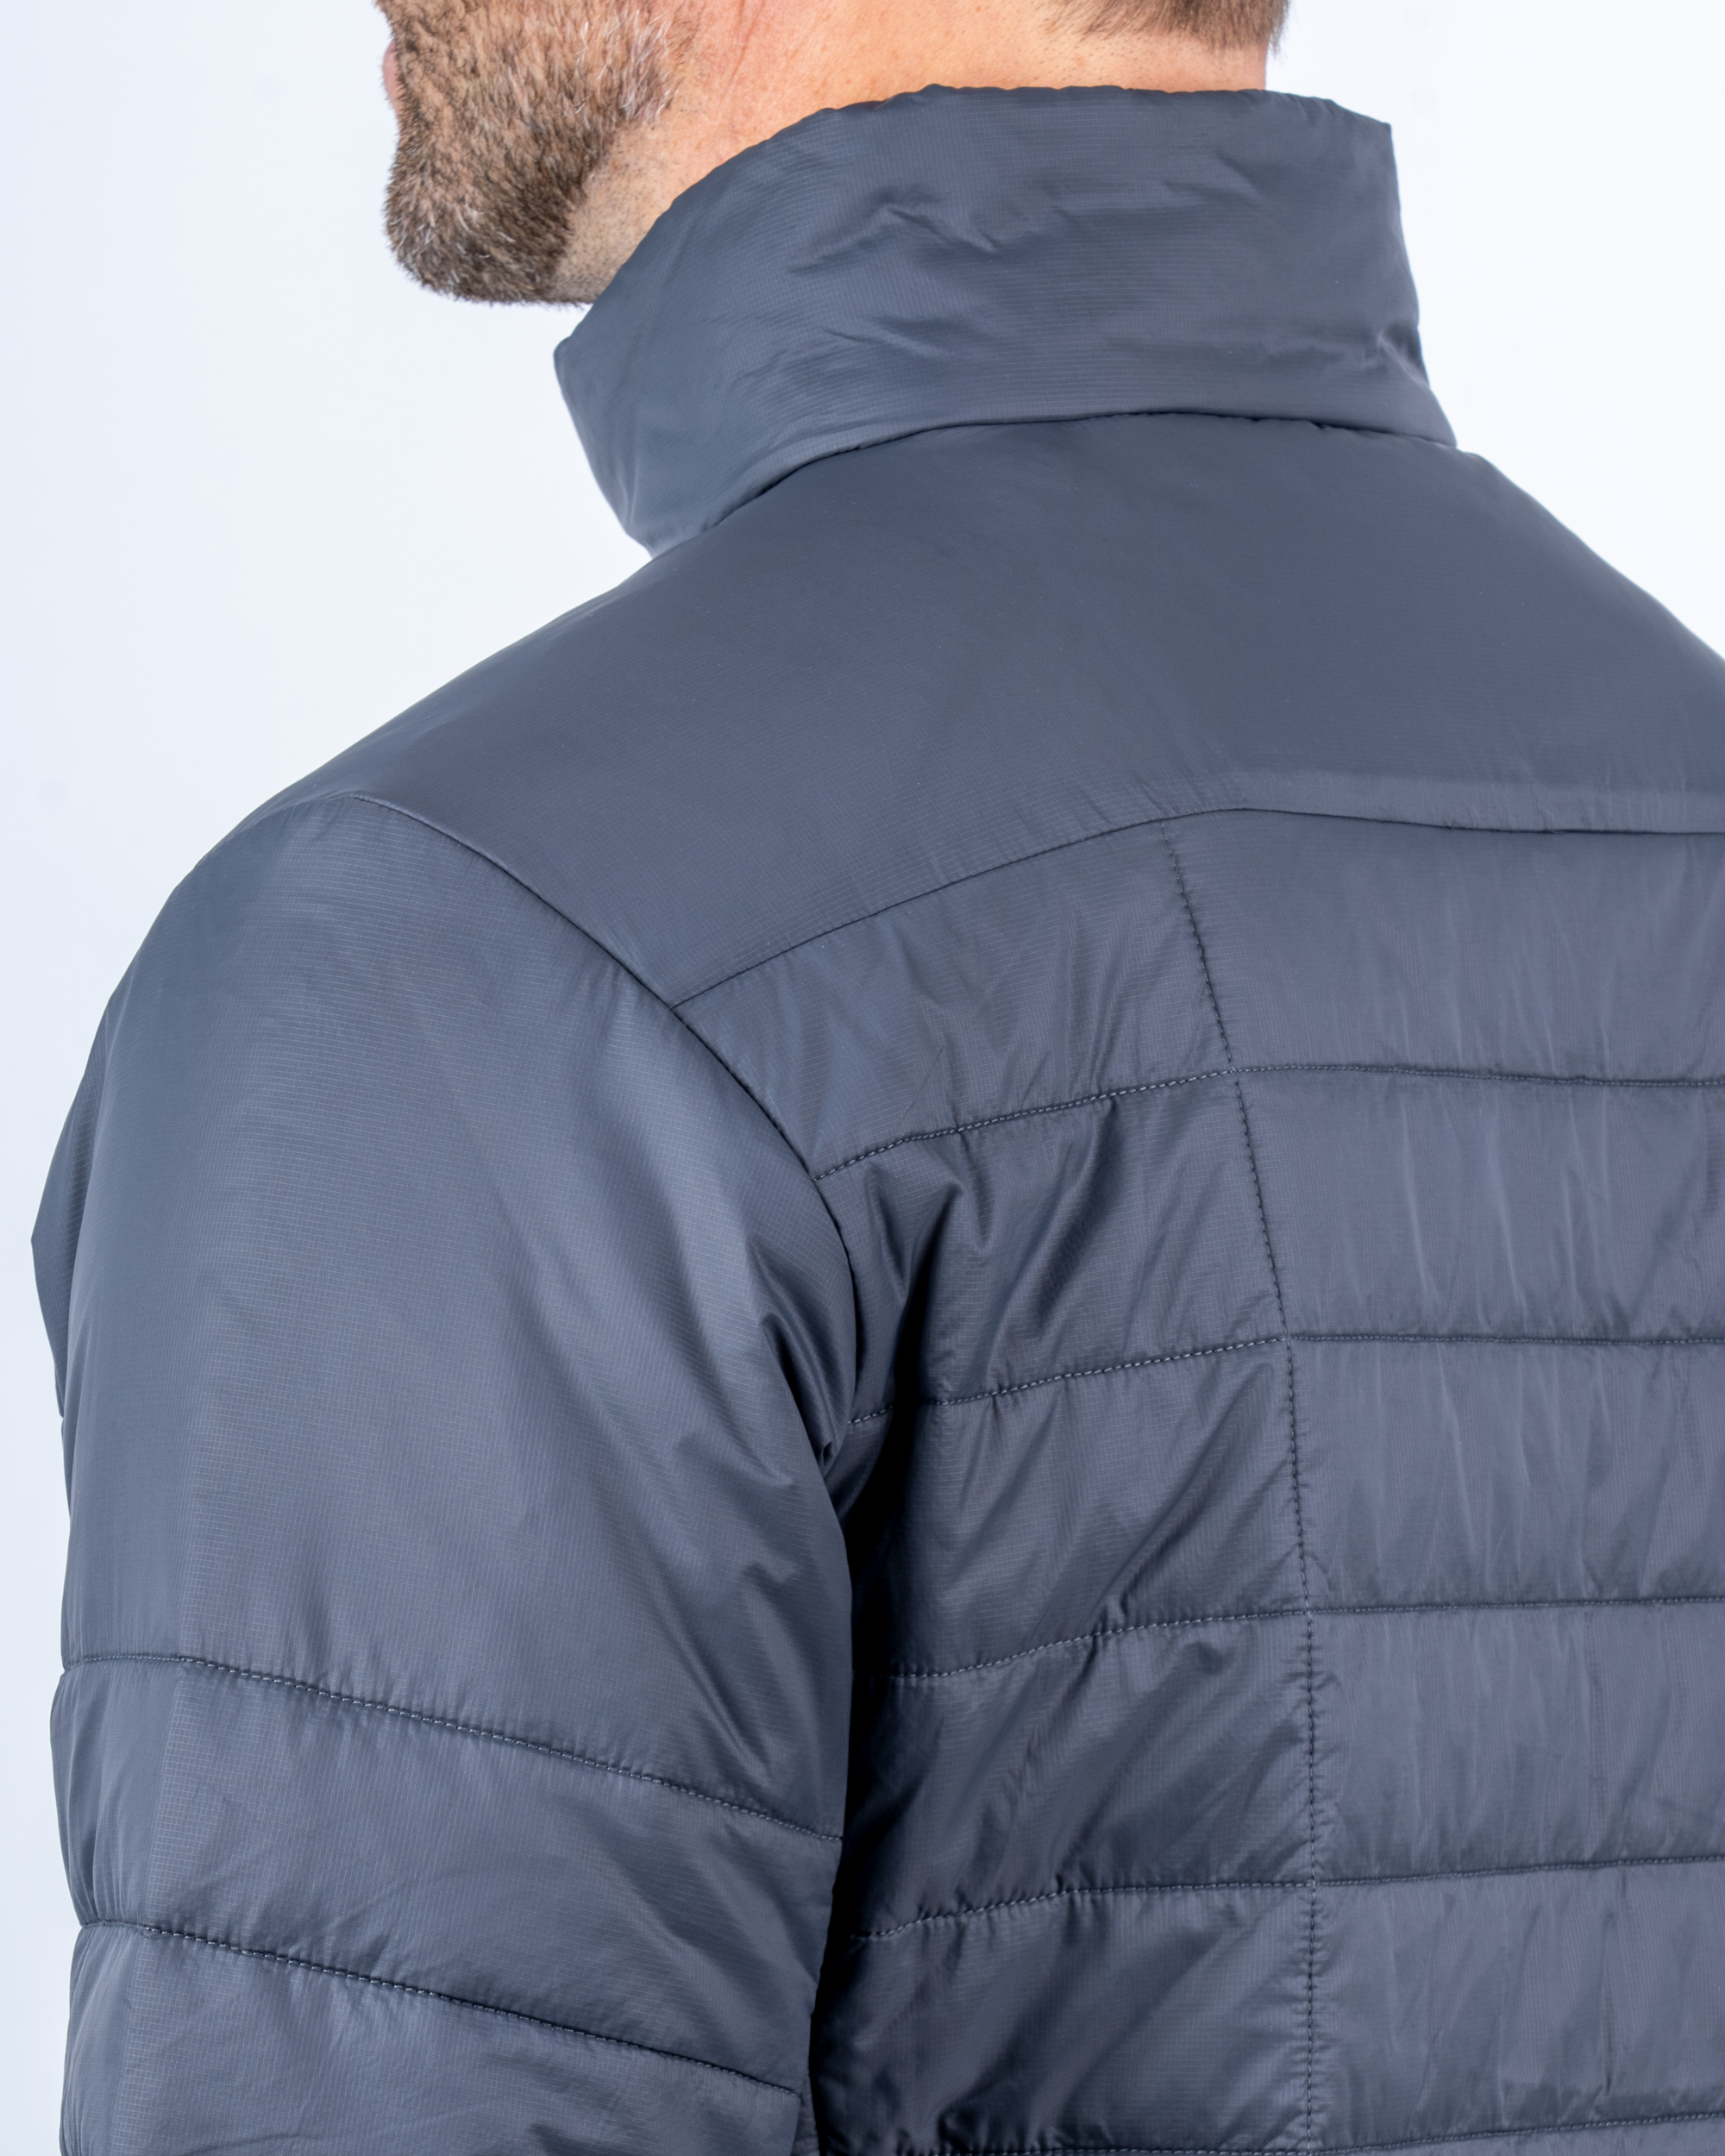 Foreign Rider Co Recycled Primaloft Gold Insulated Eco Grey Jacket Back Shoulder and Neck Detail